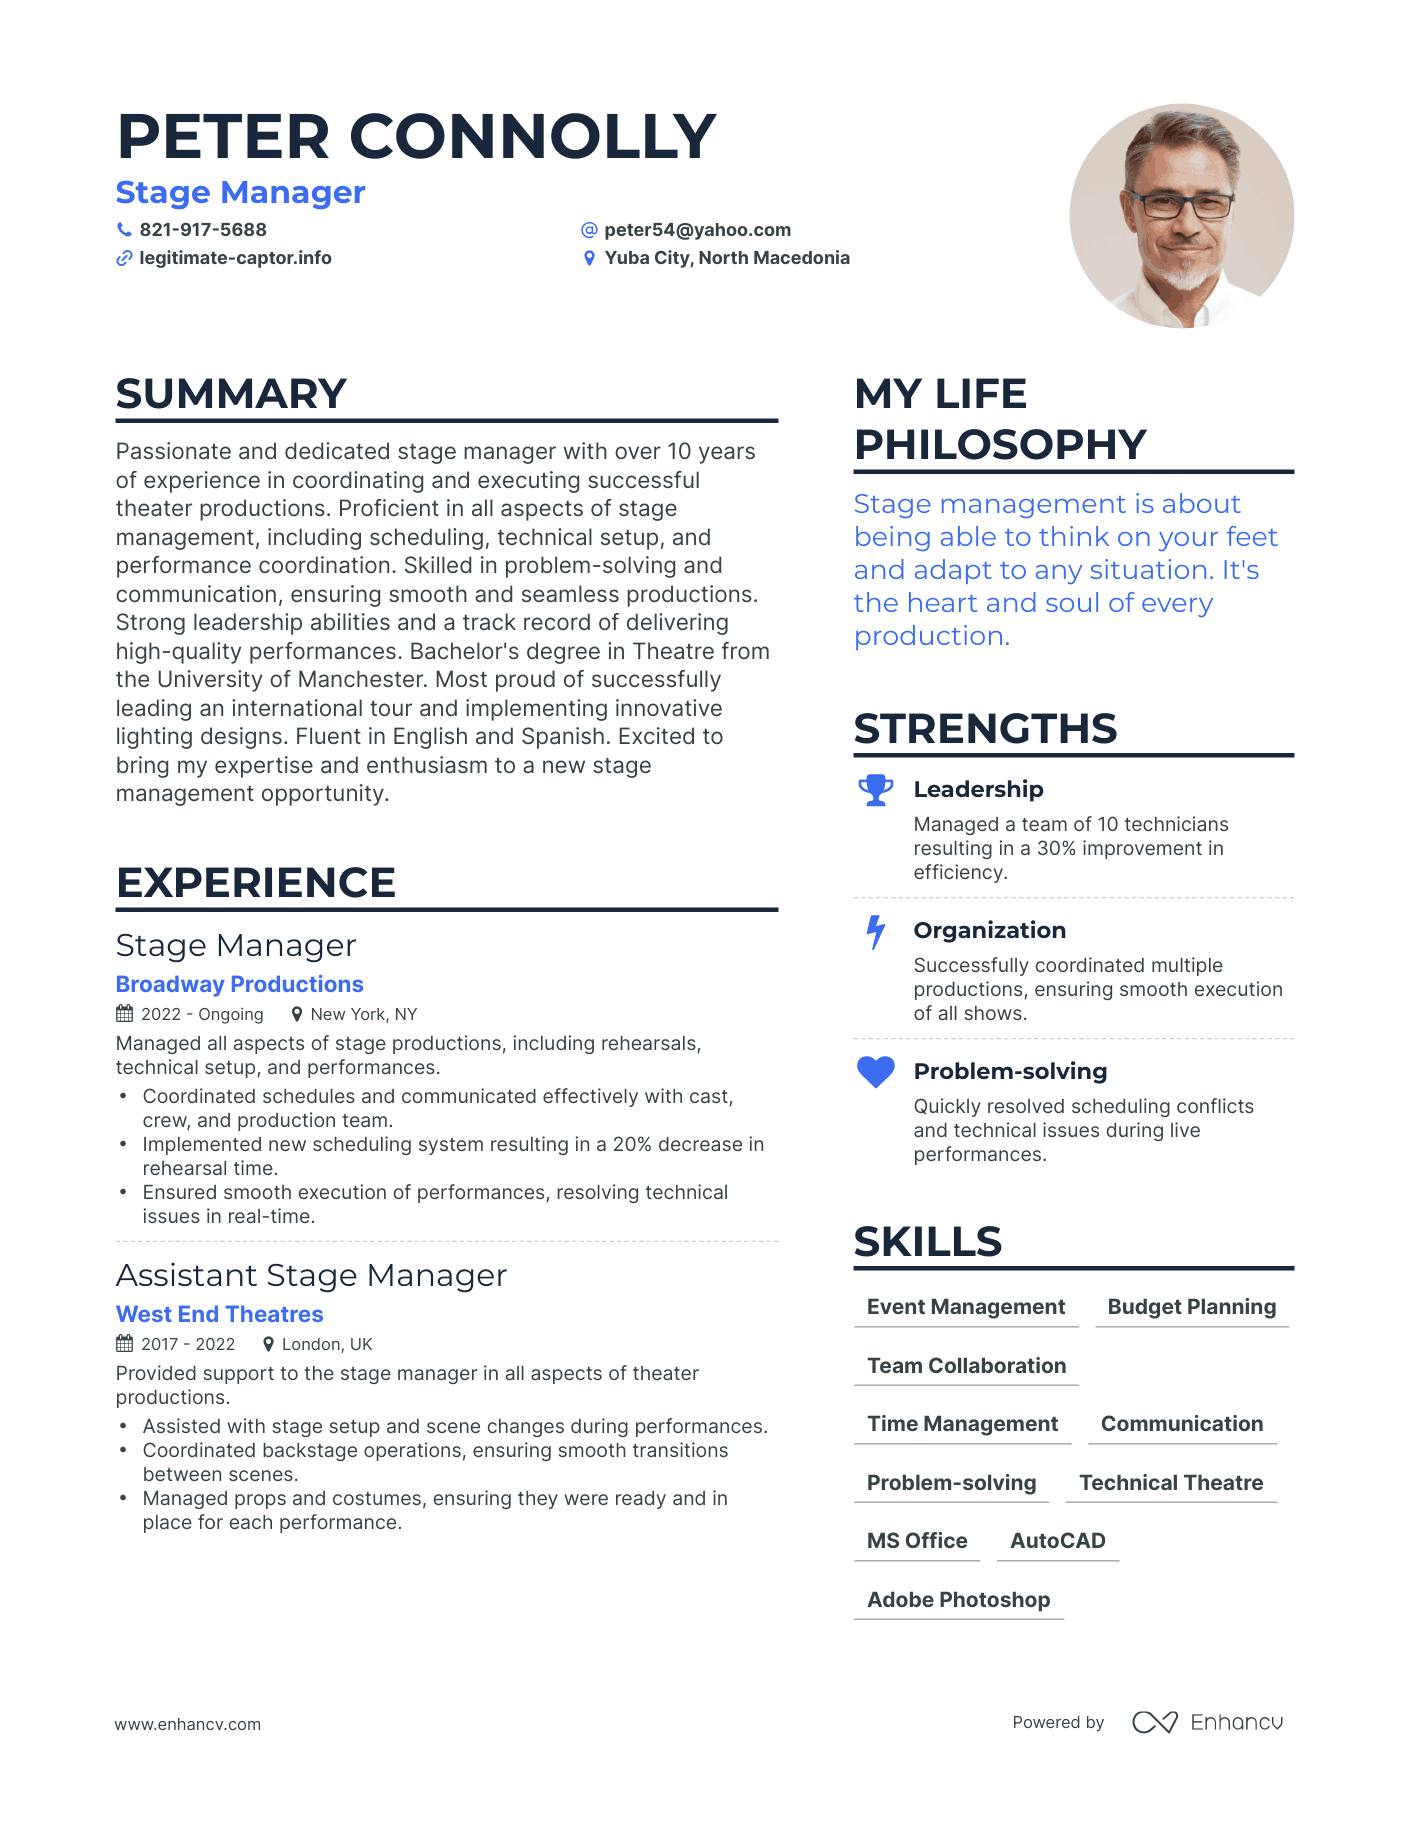 Stage Manager resume example